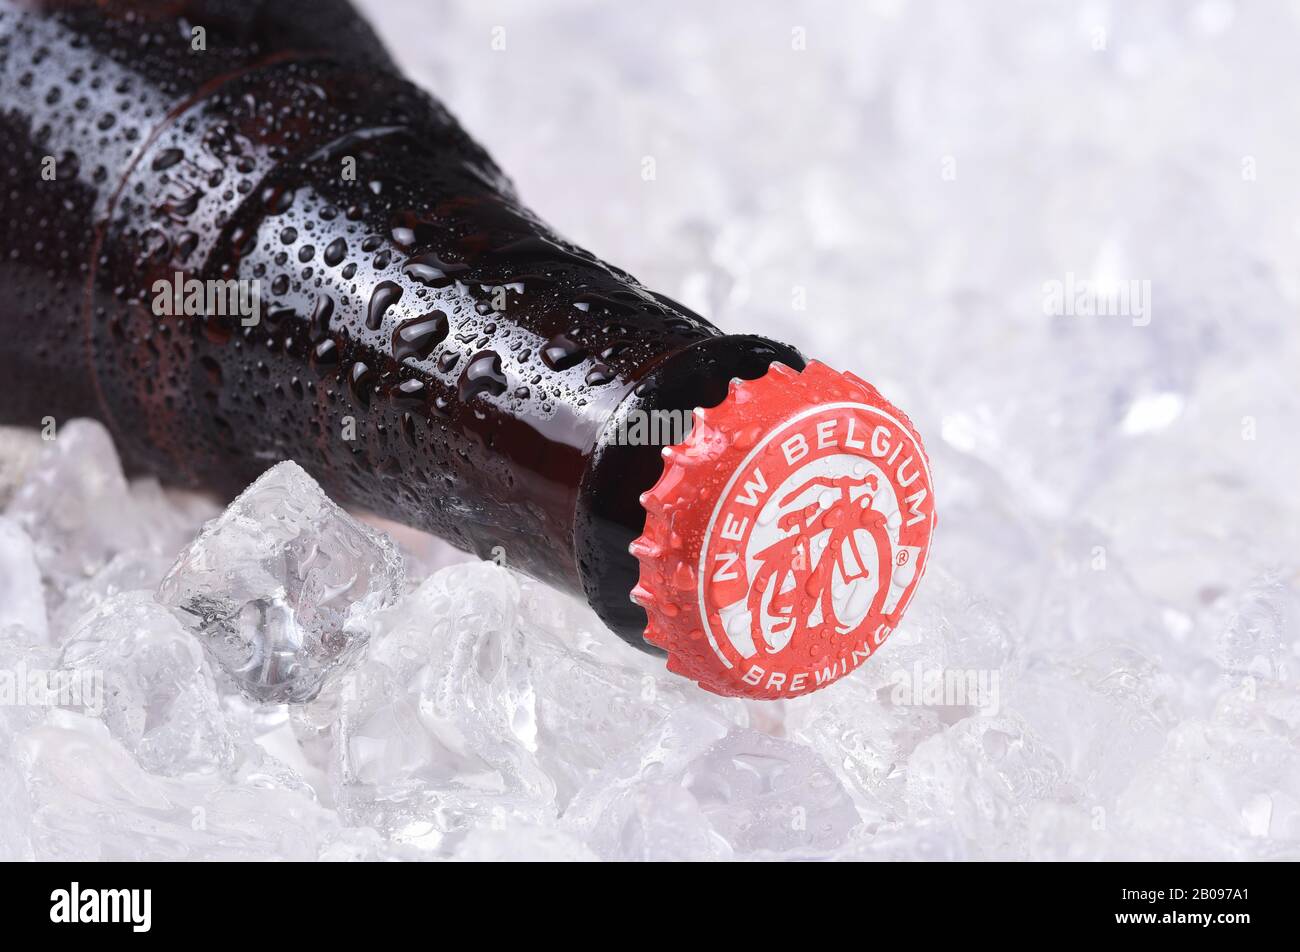 IRVINE, CALIFORNIA - December 14, 2017: Fat Tire Amber Ale bottle on ice. From the New Belgium Brewing Company, of Fort Collins, Colorado. Stock Photo